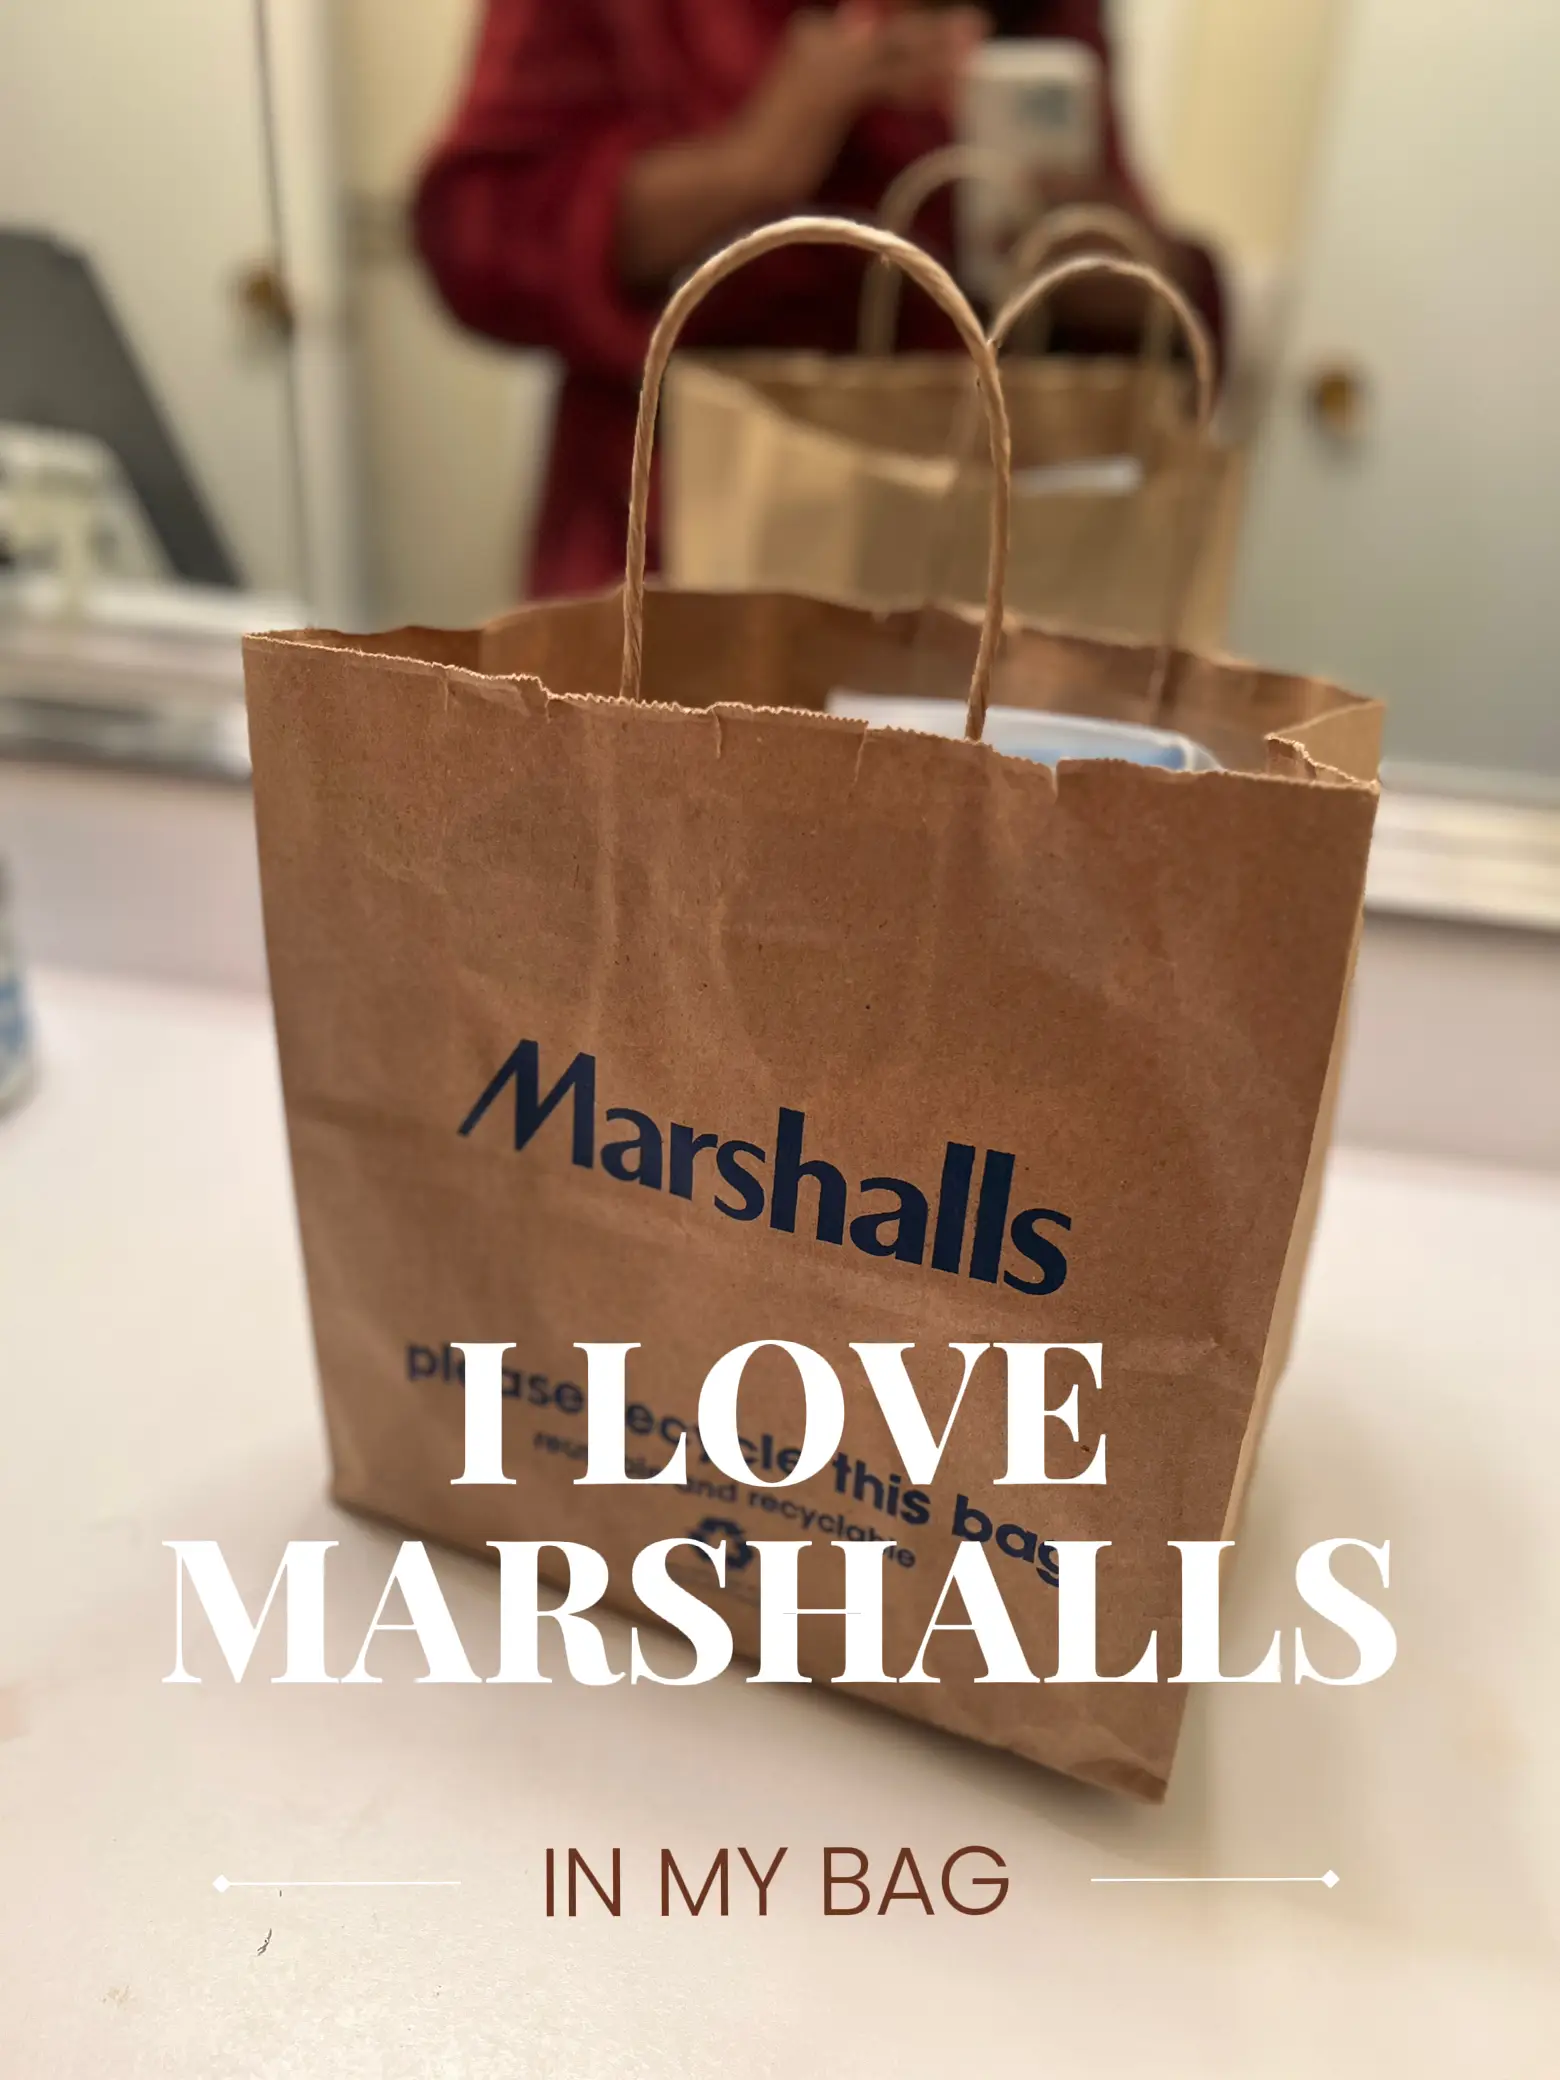 NEW Marshalls Shopping Bag Reusable Travel Tote Colorful Paint Brushes NWT